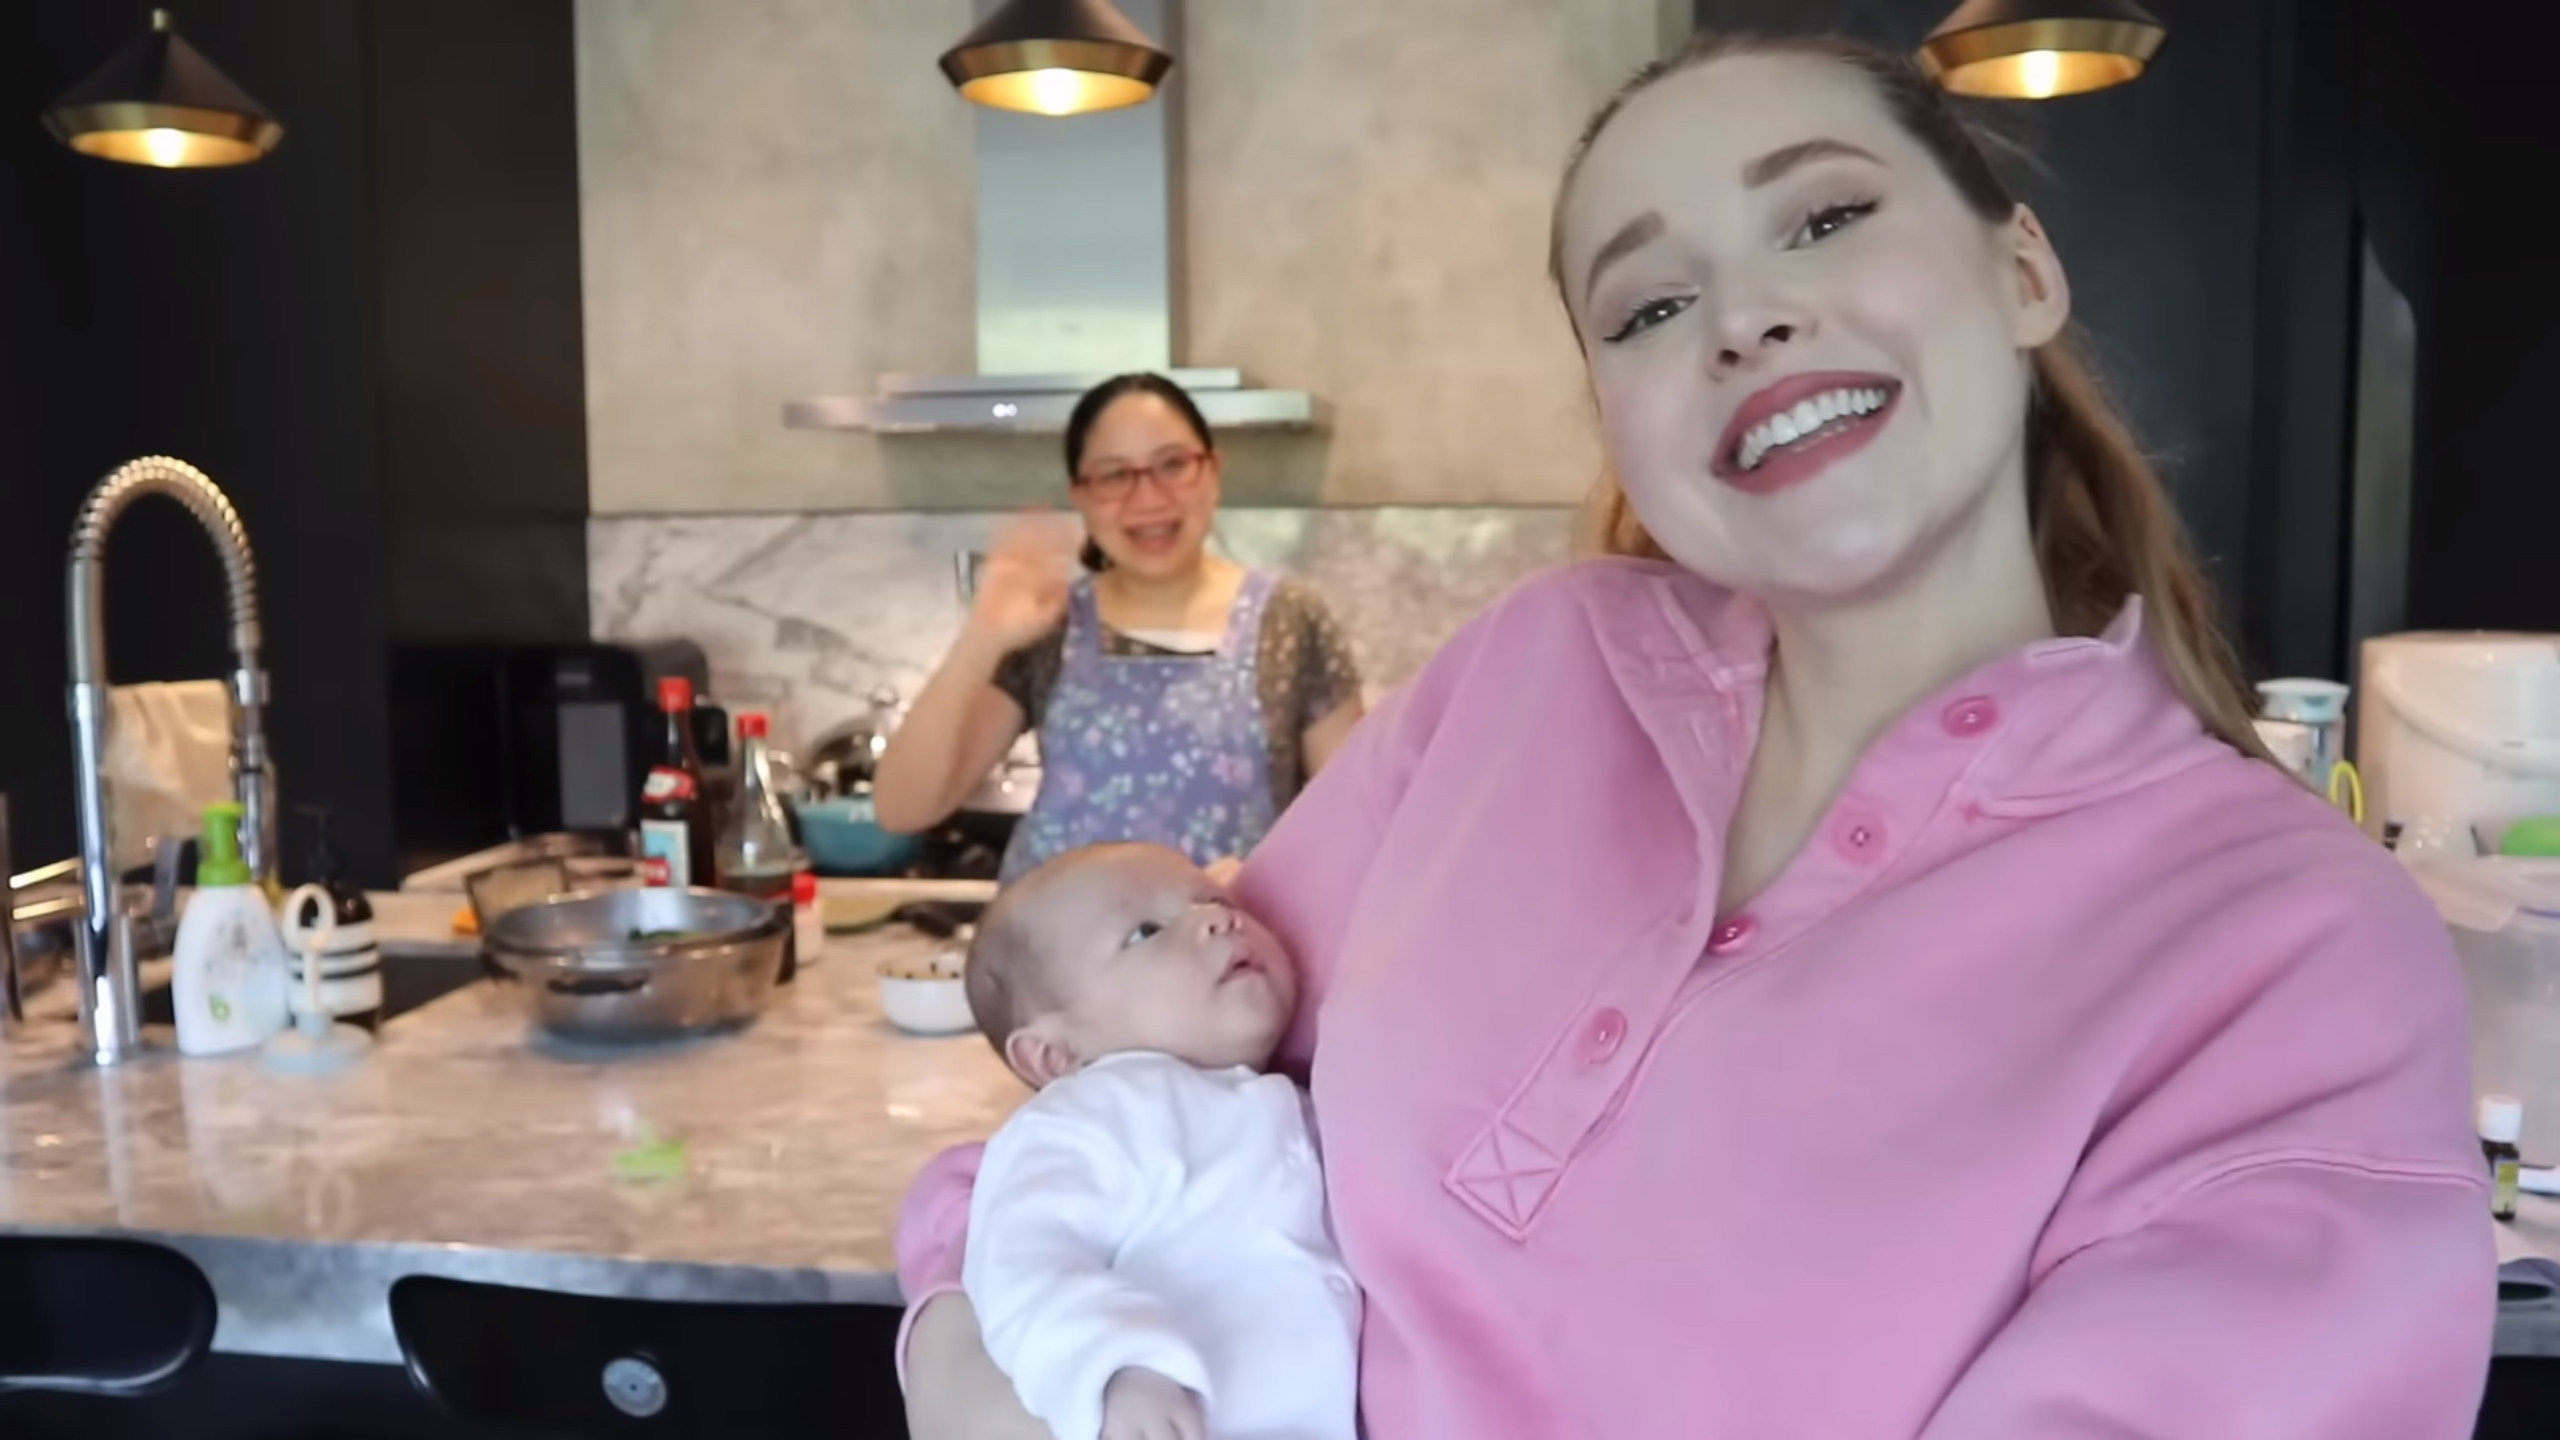 Carol Chan (left), a confinement nanny, together with Taylor Richards. Richard vlogged about her experience undergoing a month of Chinese confinement after giving birth. Photo: YouTube/@Taylor R